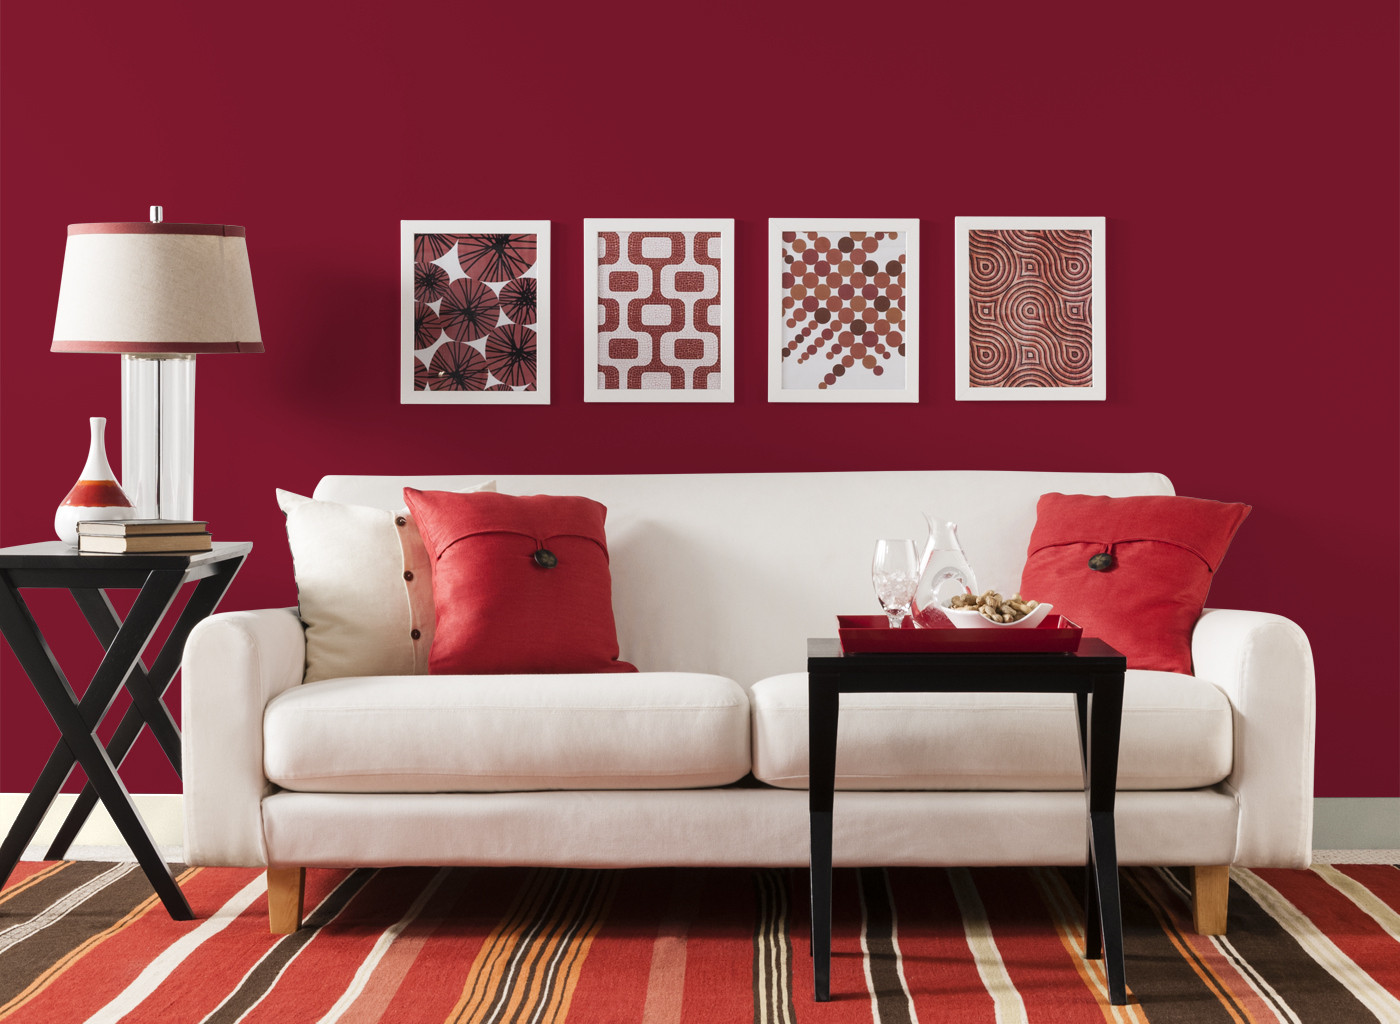 Popular Colors For Living Room
 Best Paint Color for Living Room Ideas to Decorate Living